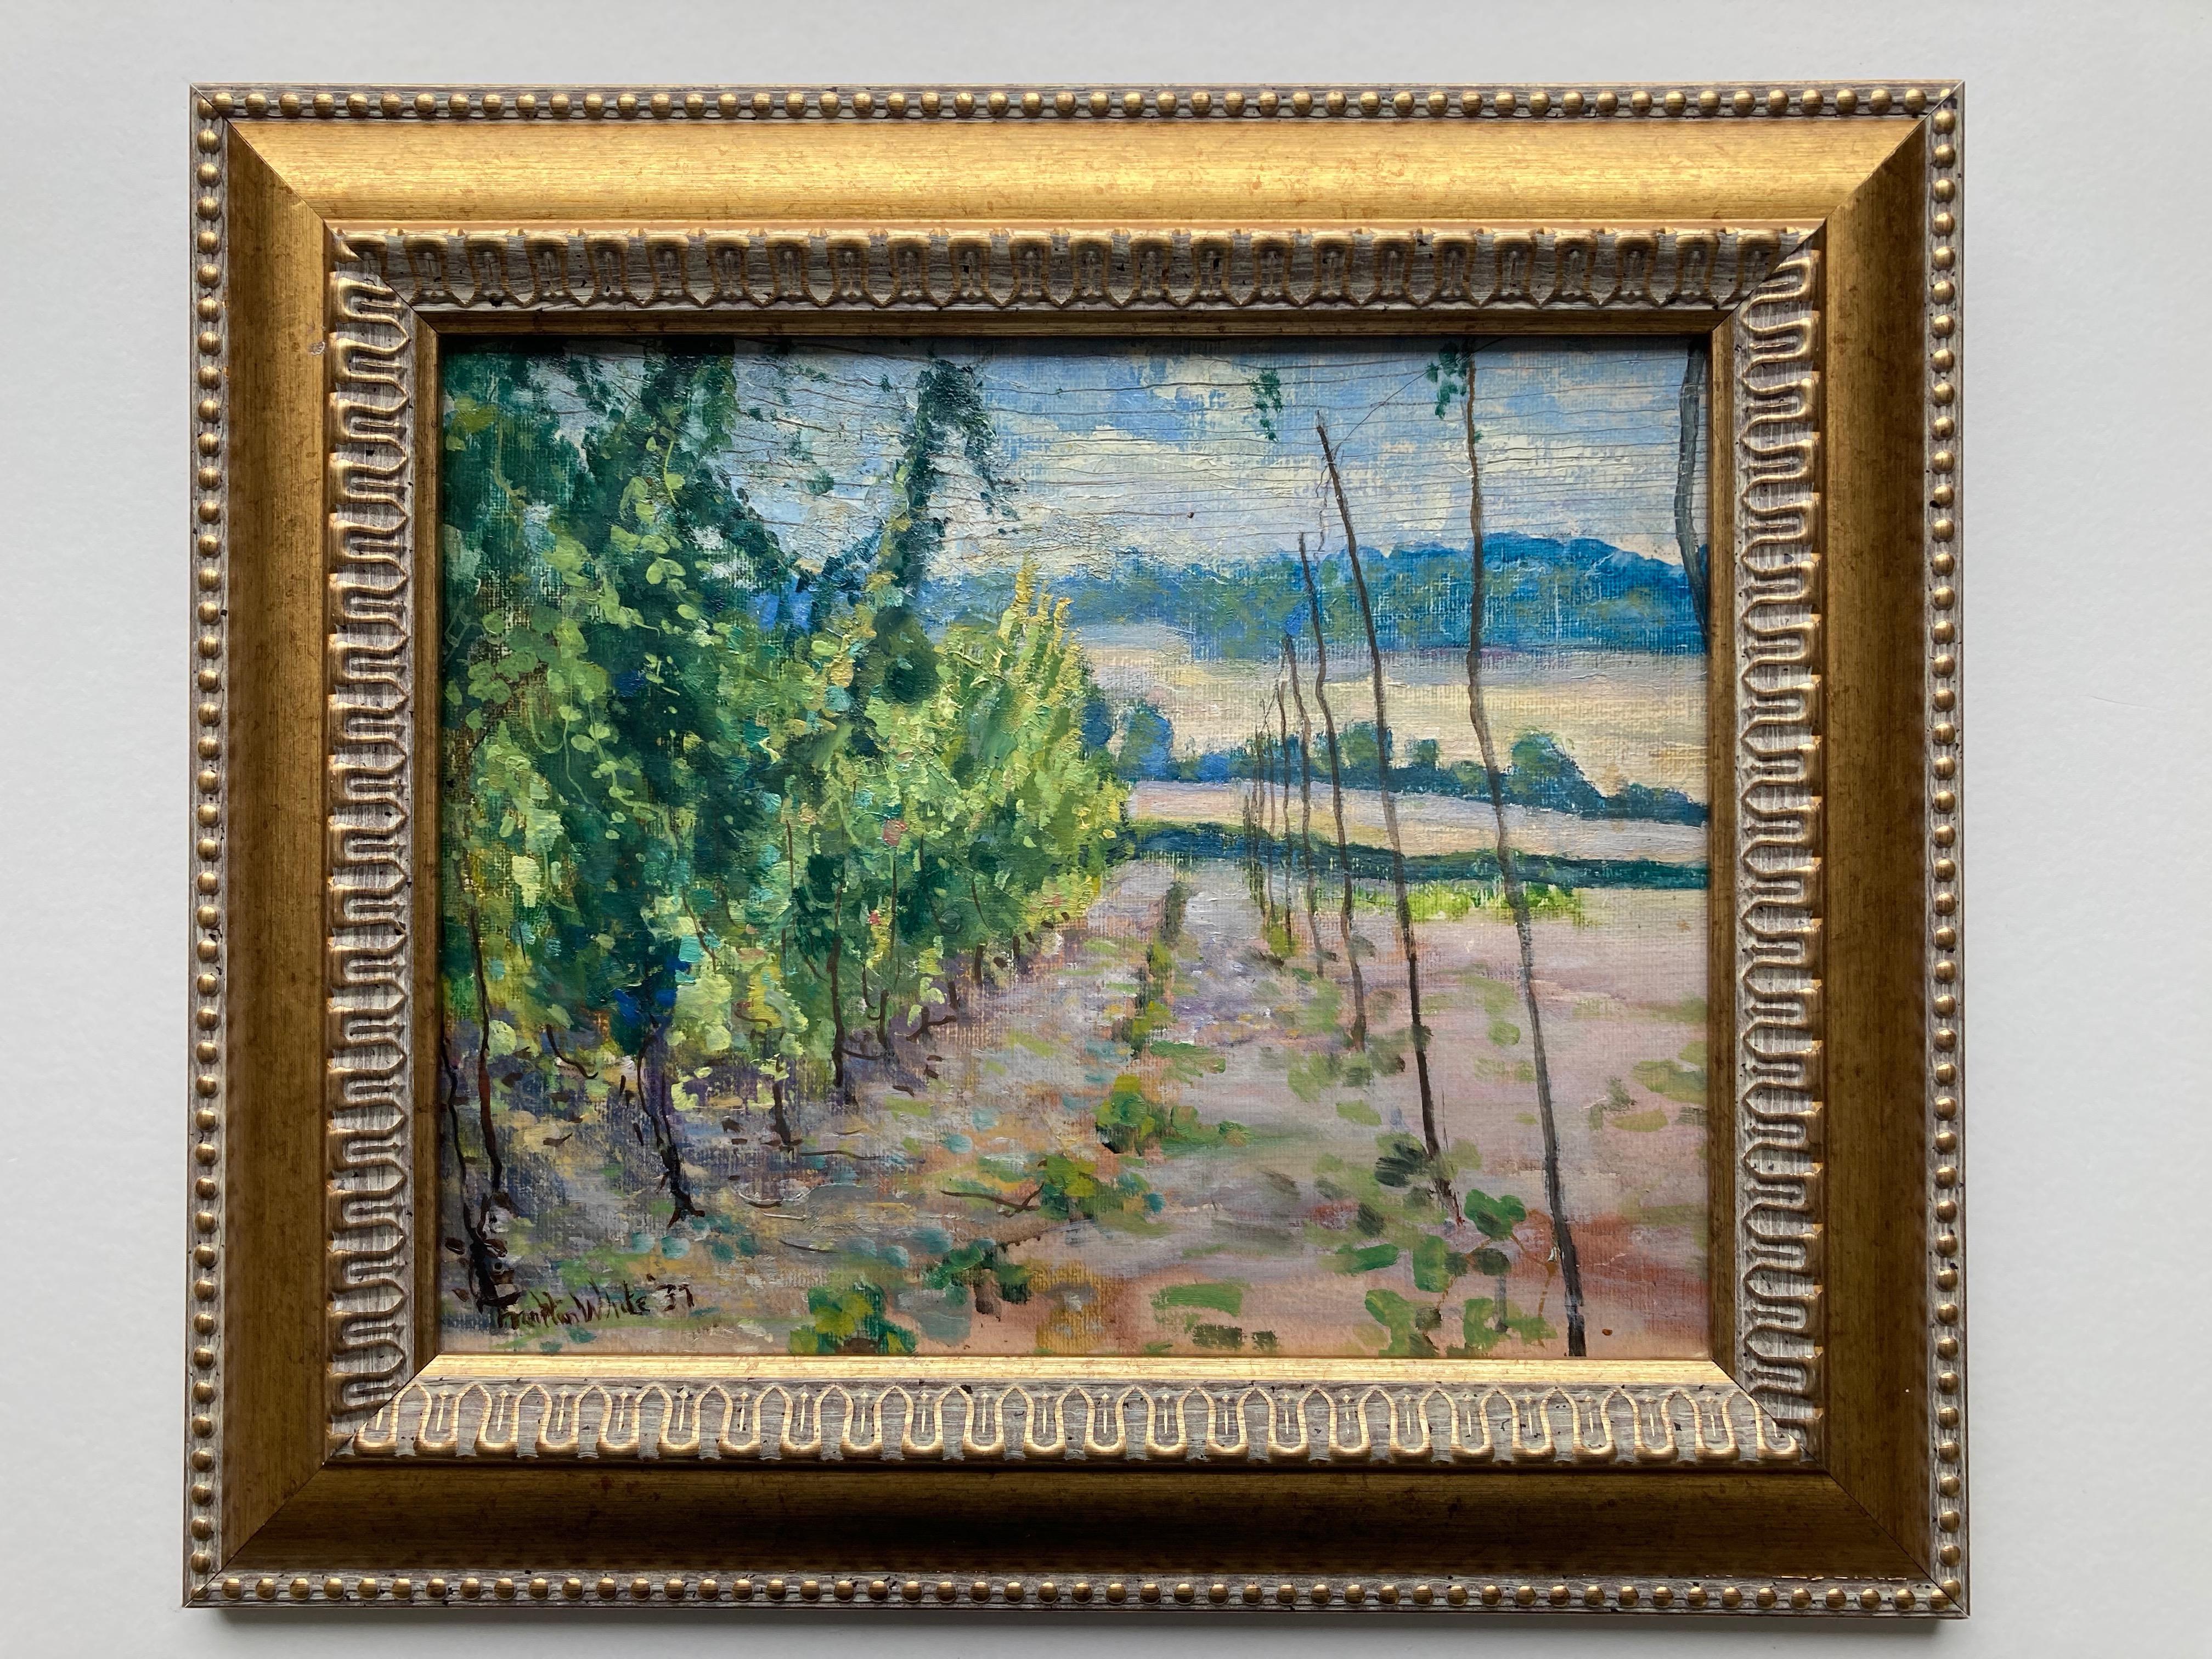 A wonderful image of hop vines in the Kentish countryside, Southern England.

Franklin White (1892-1975)
Hope vines with growing wires
Signed and dated (19)37
Oil on canvas laid on board
9 x 11 inches unframed
13½ x 15½ inches with the